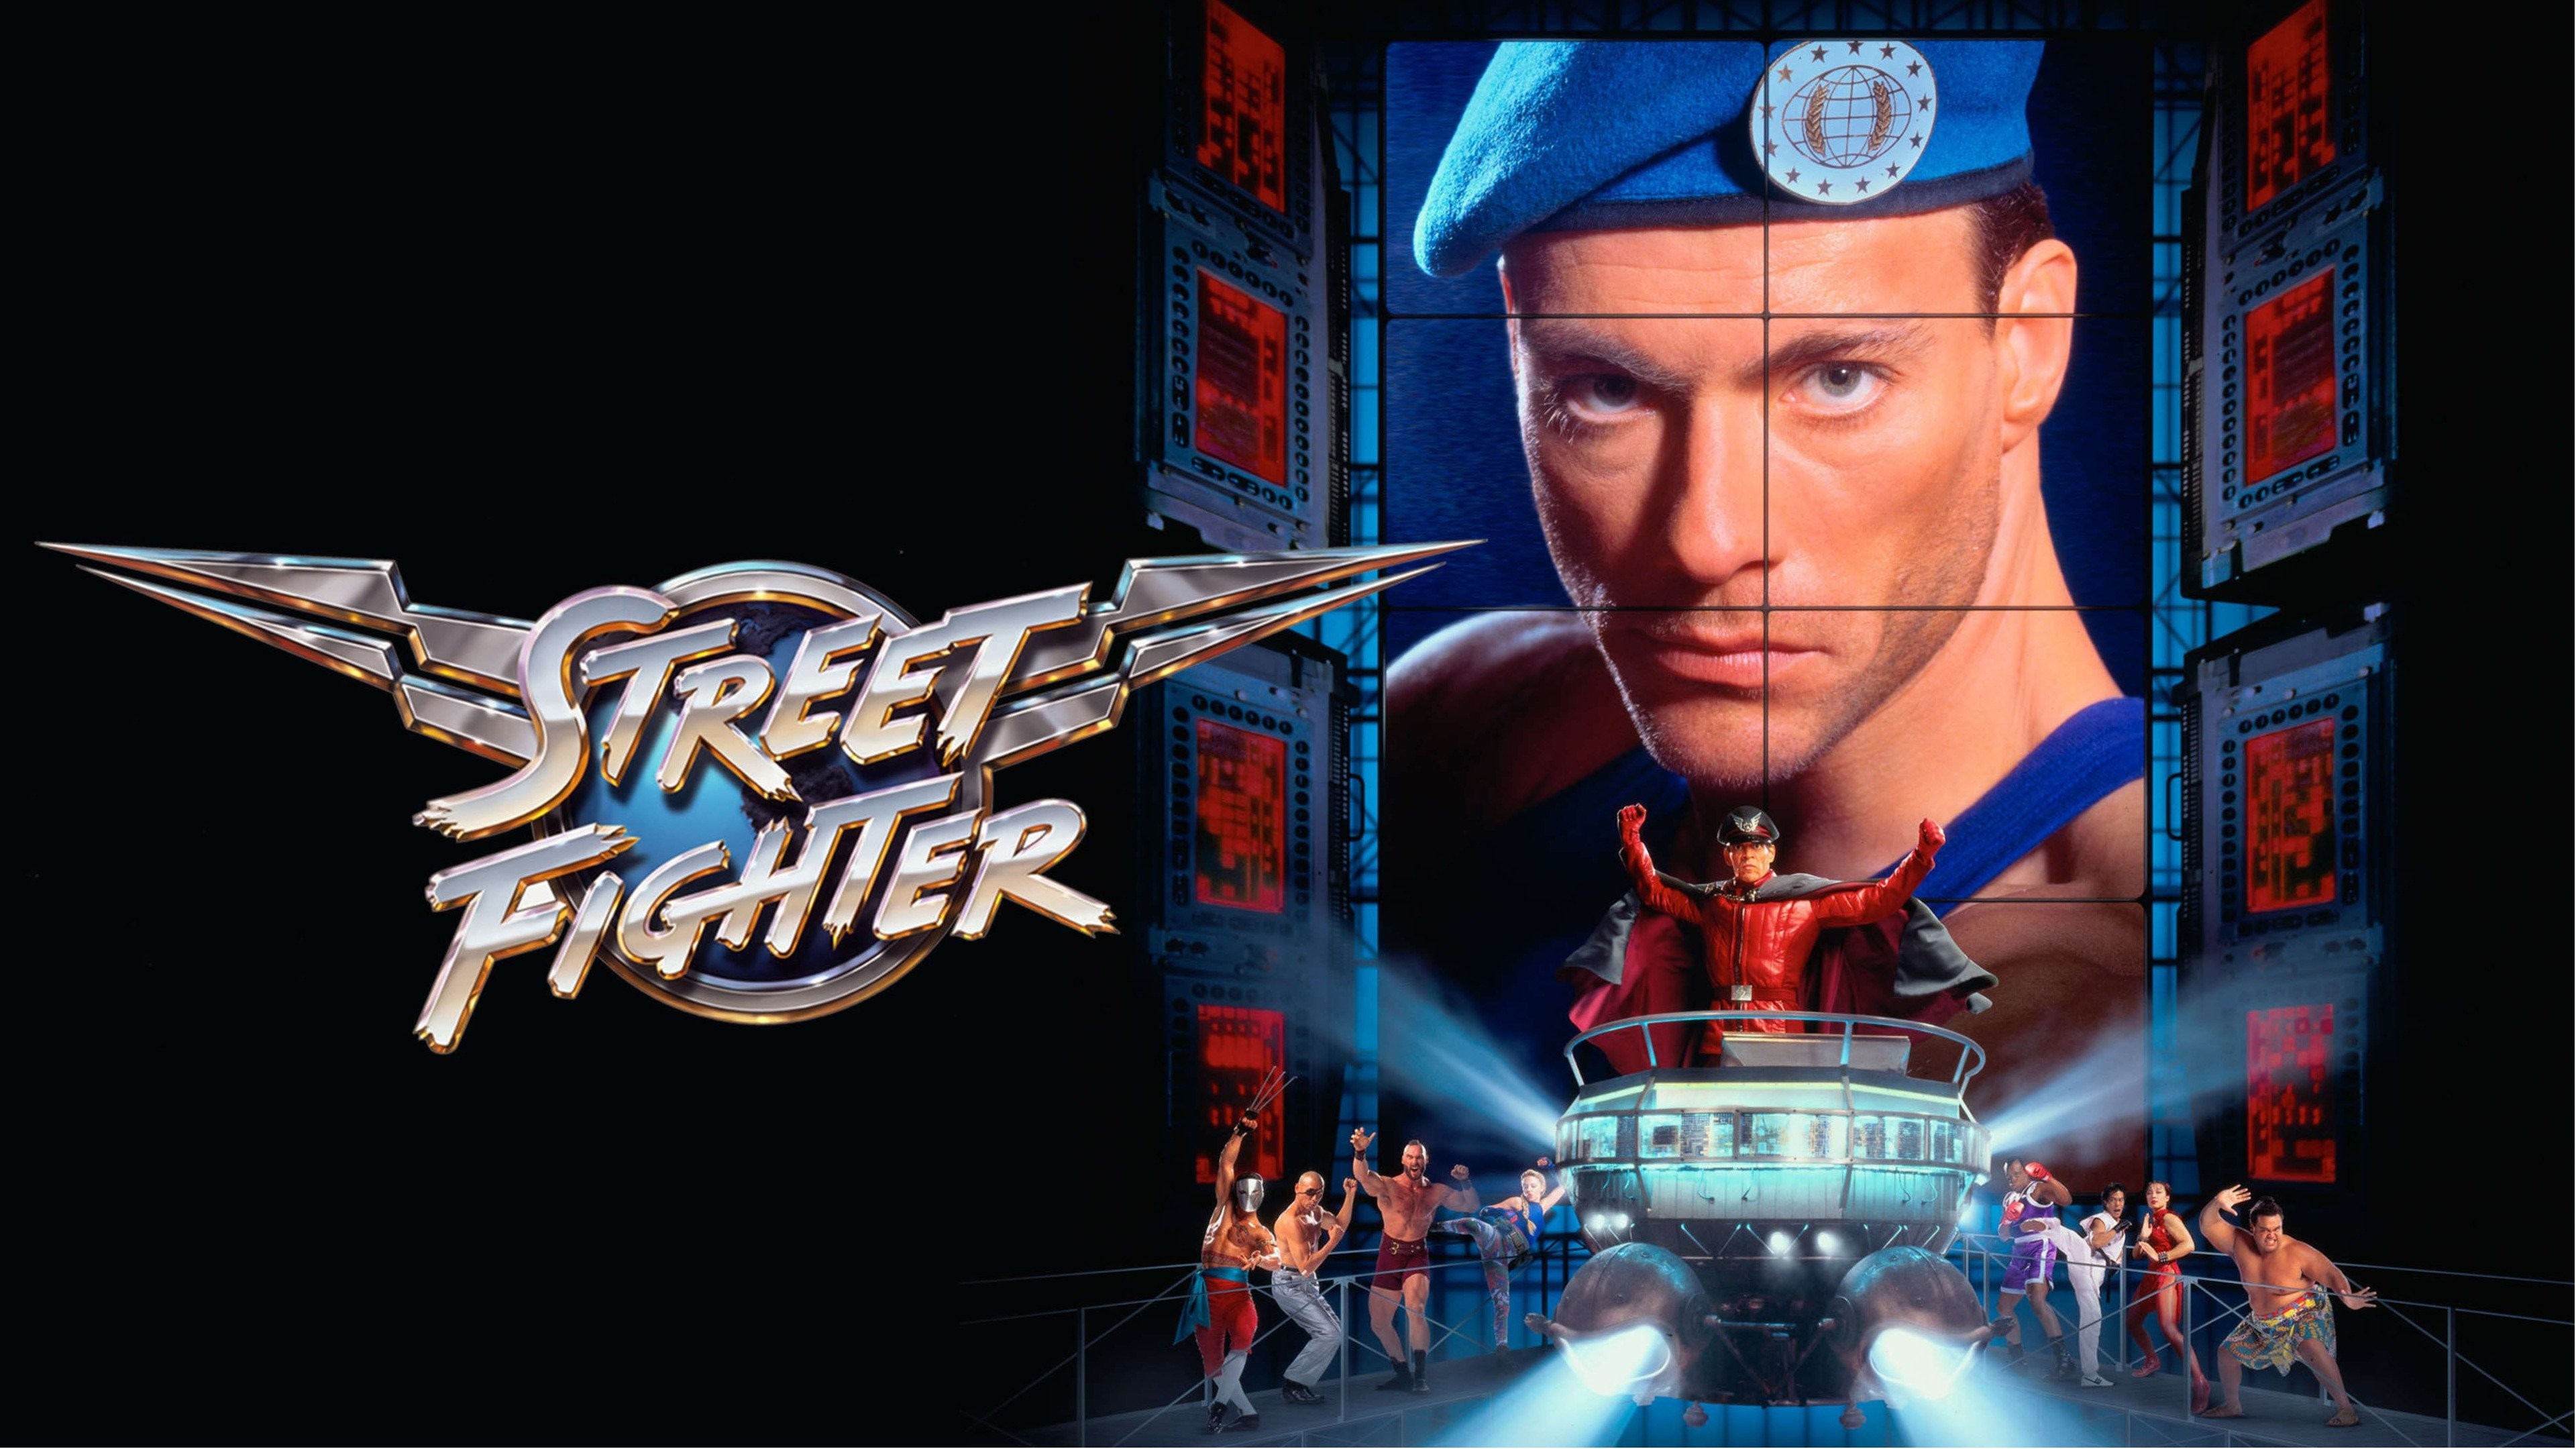 Ryu Street Fighter 2 animated movie cover, unscrewedviper